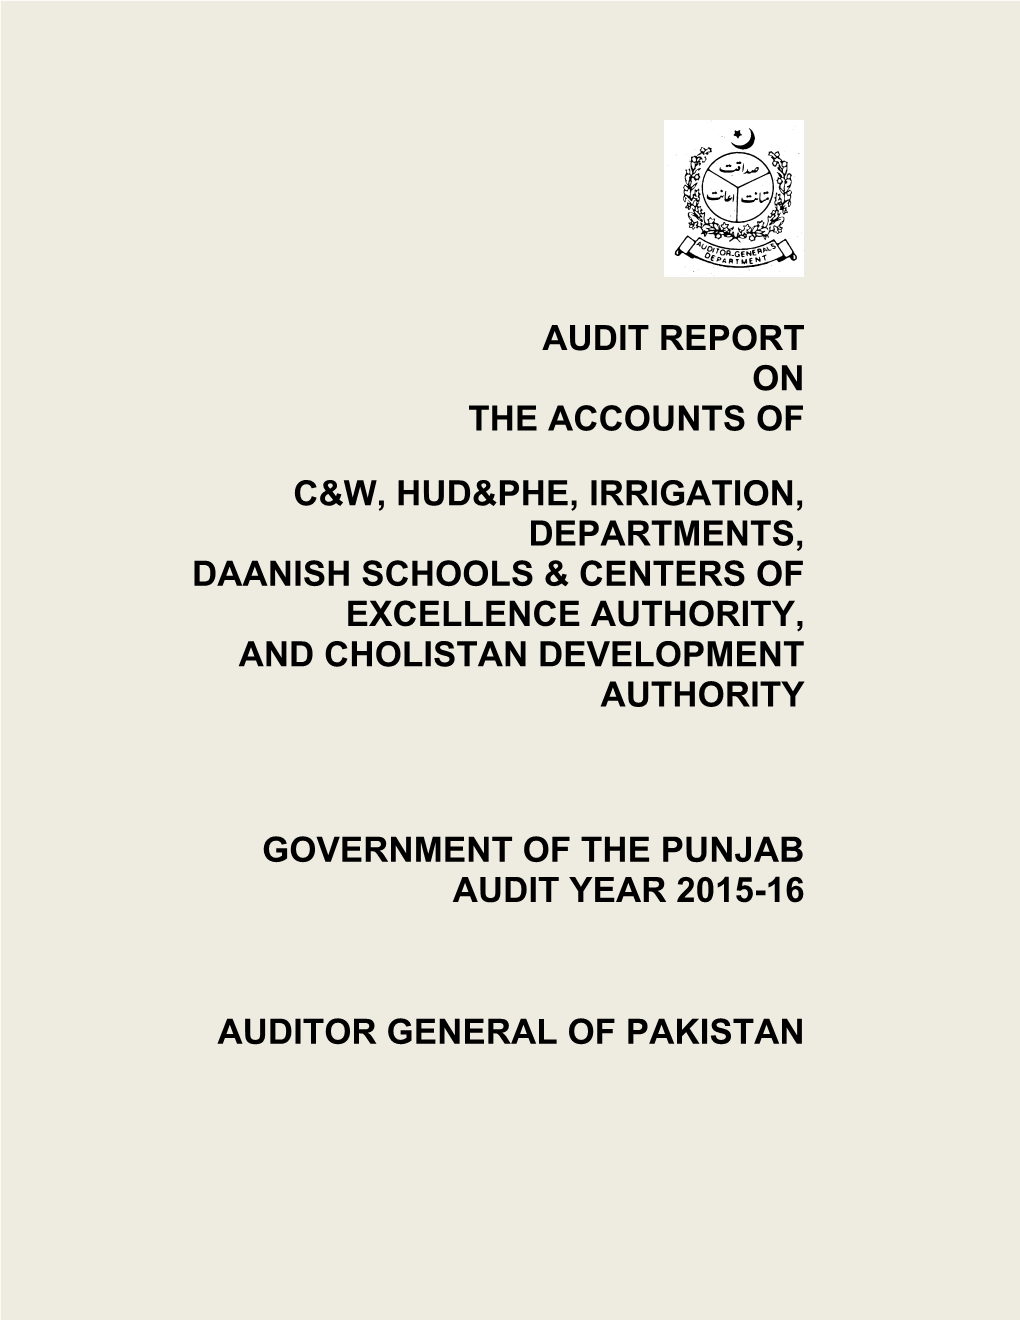 Audit Report on the Accounts of C&W, Hud&Phe, Irrigation